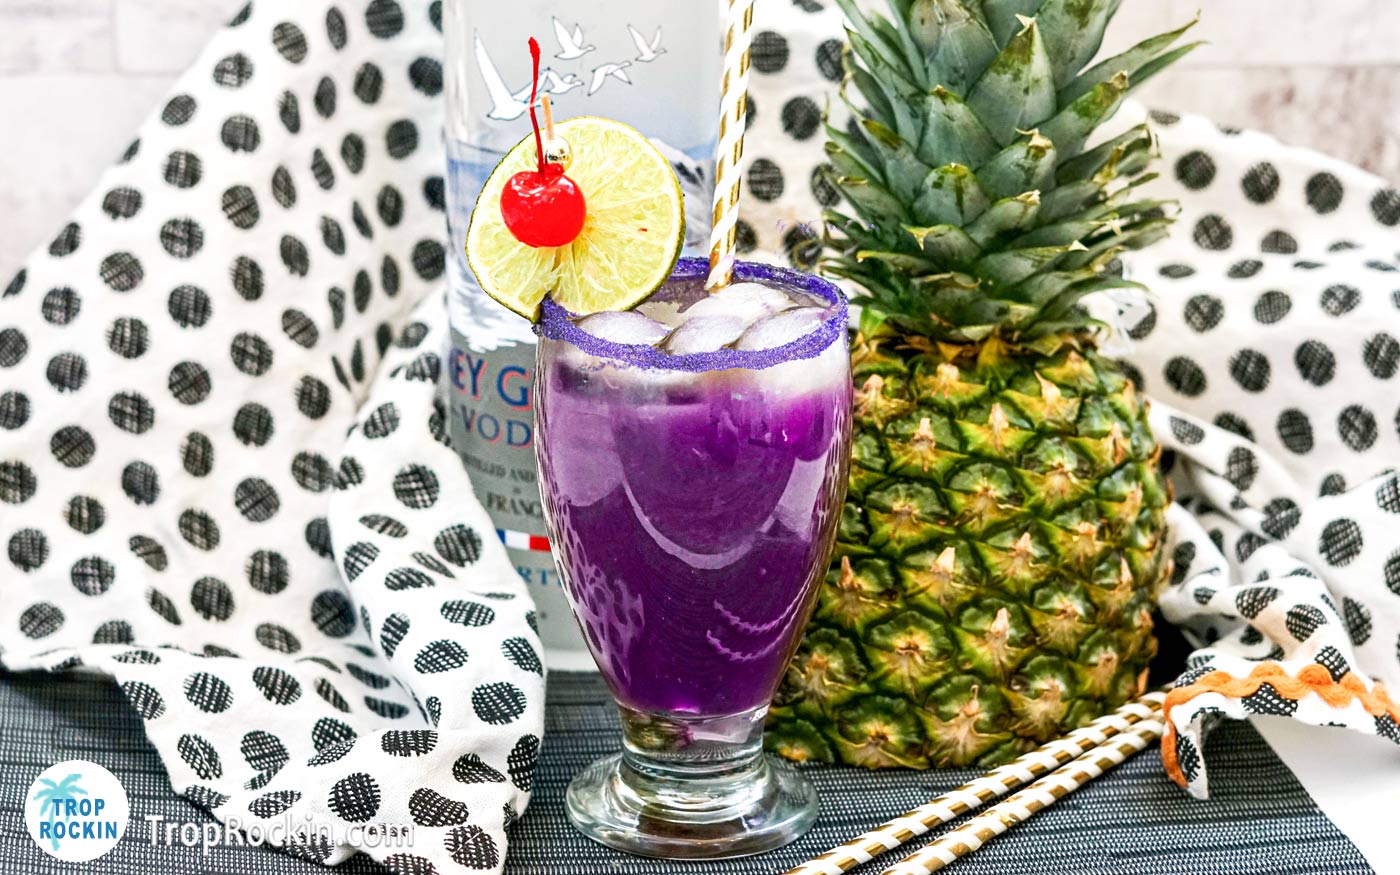 Purple Rain drink with lime and cherry garnish with a fresh pineapple and bottle of vodka in the background.